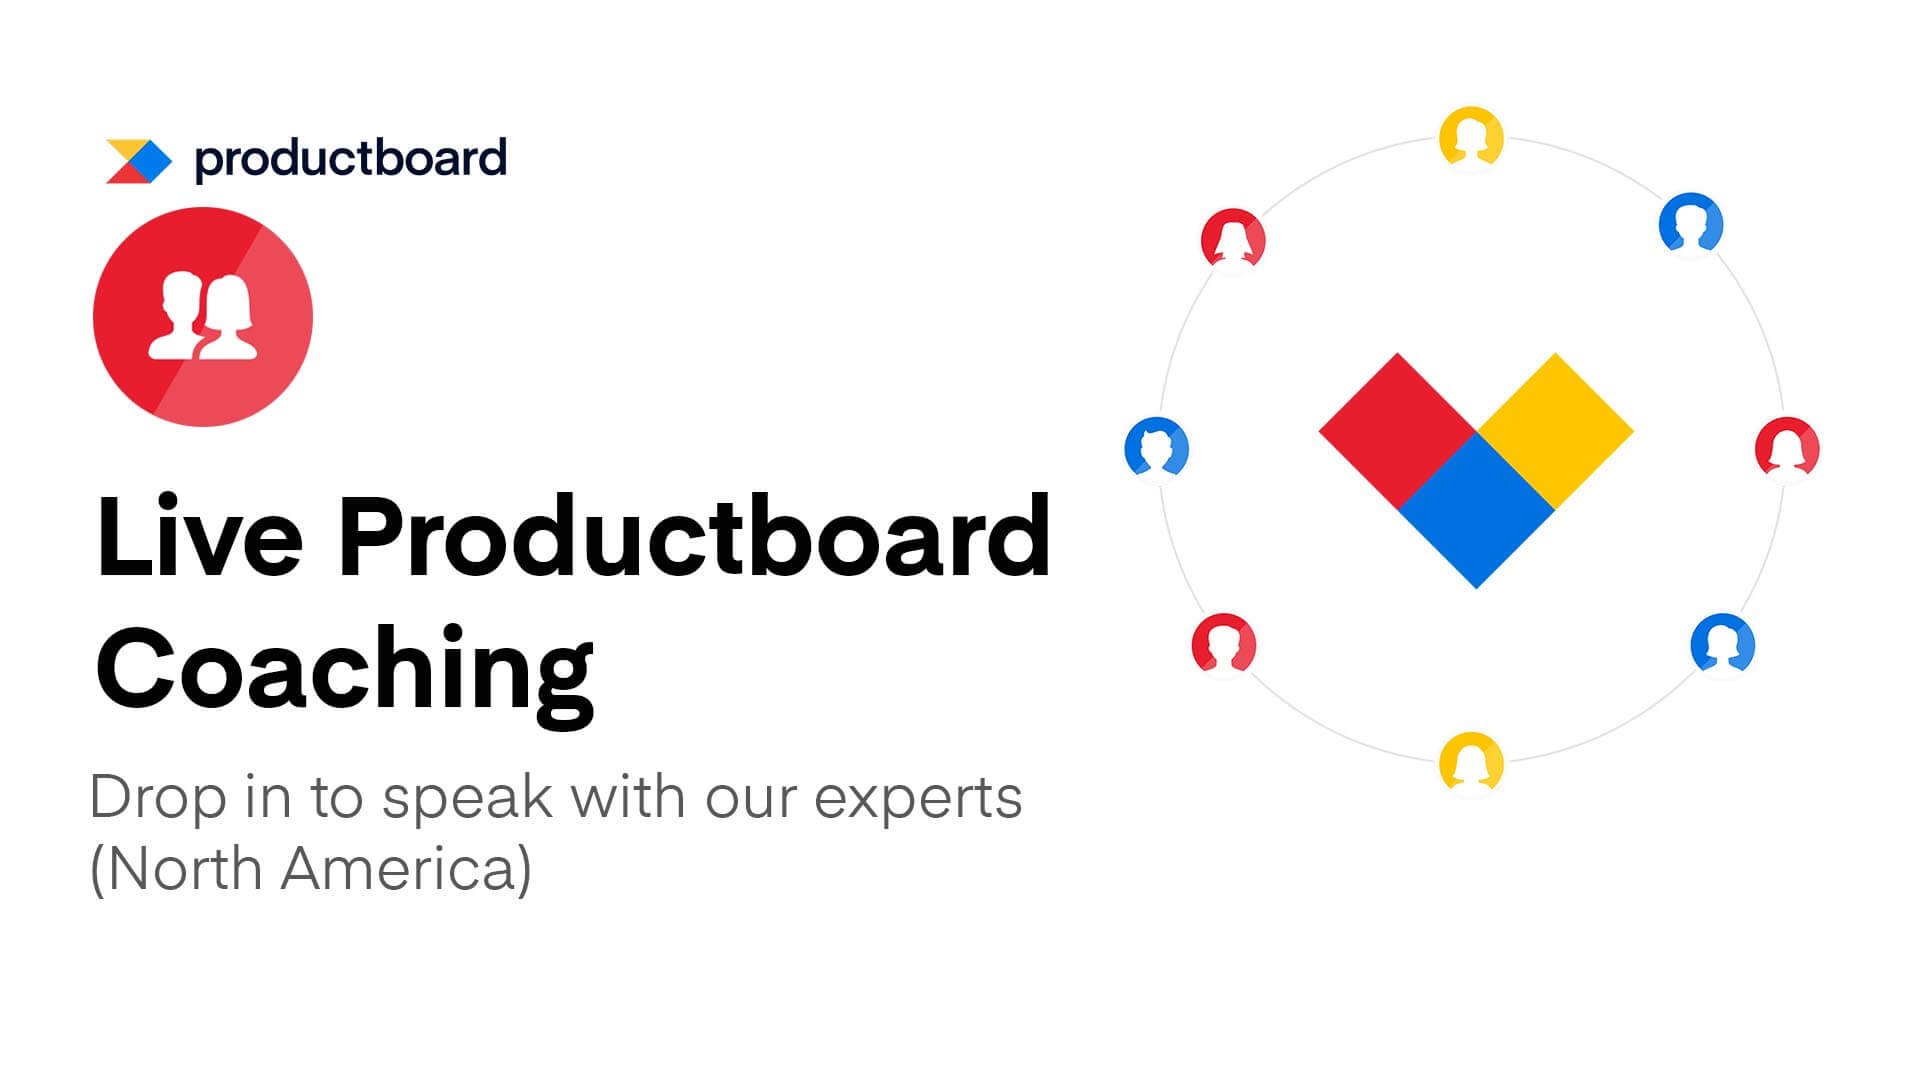 3/10 Live Productboard Coaching (North America)